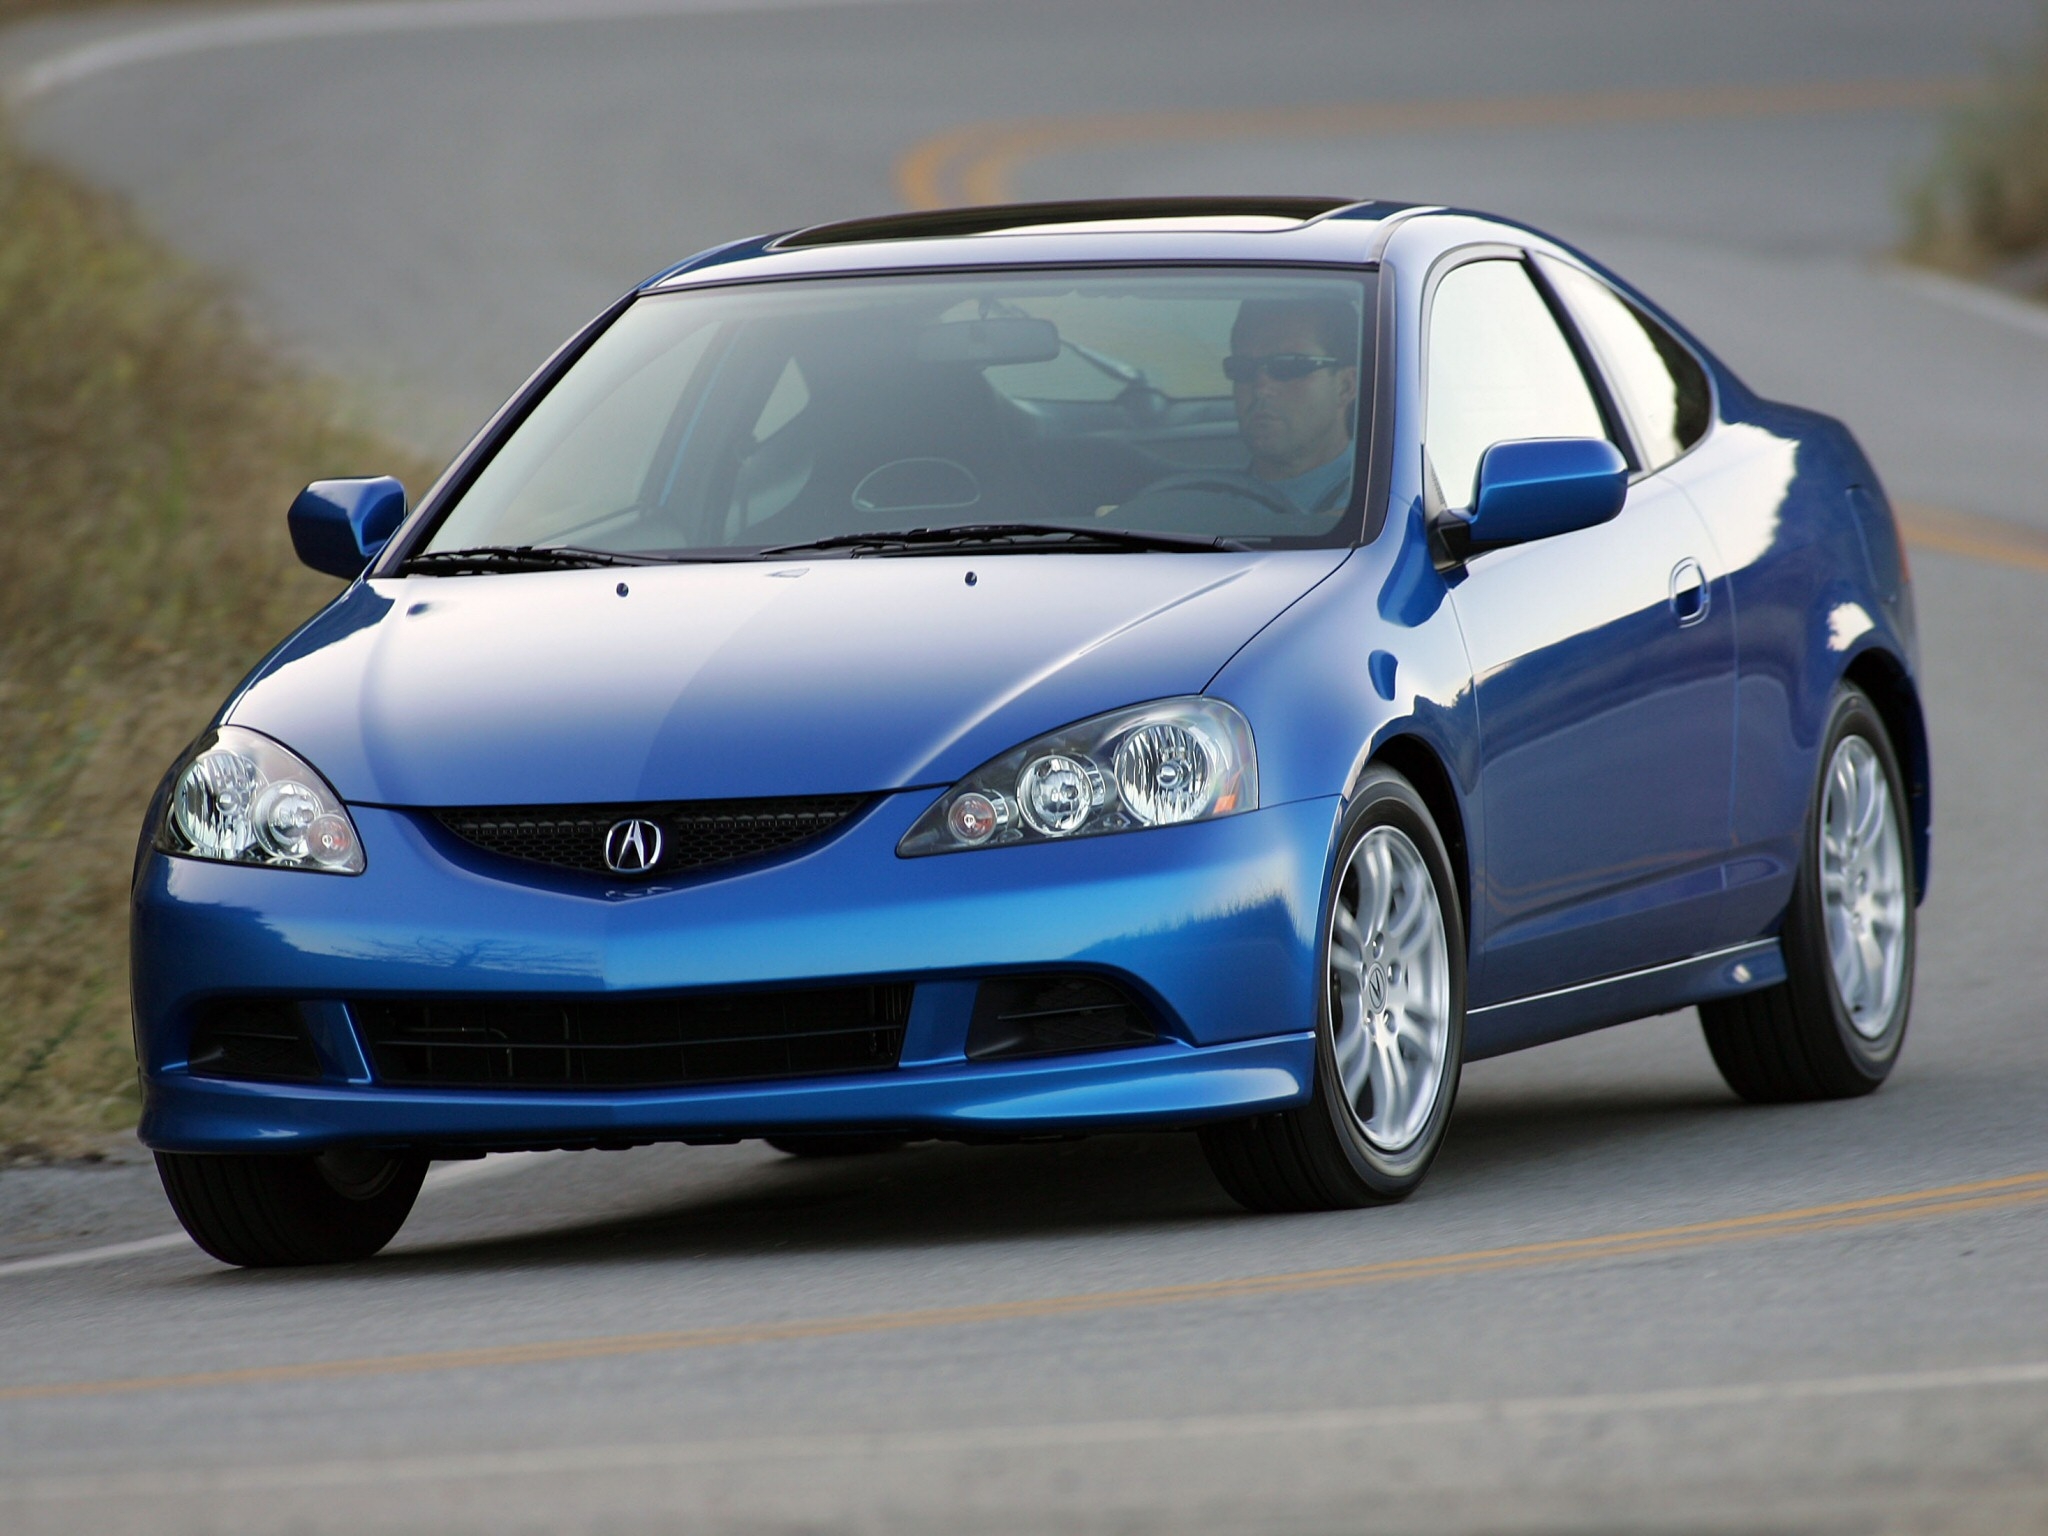 1920 x 1080 picture auto, acura, cars, blue, road, front view, style, rsx, 2005, akura